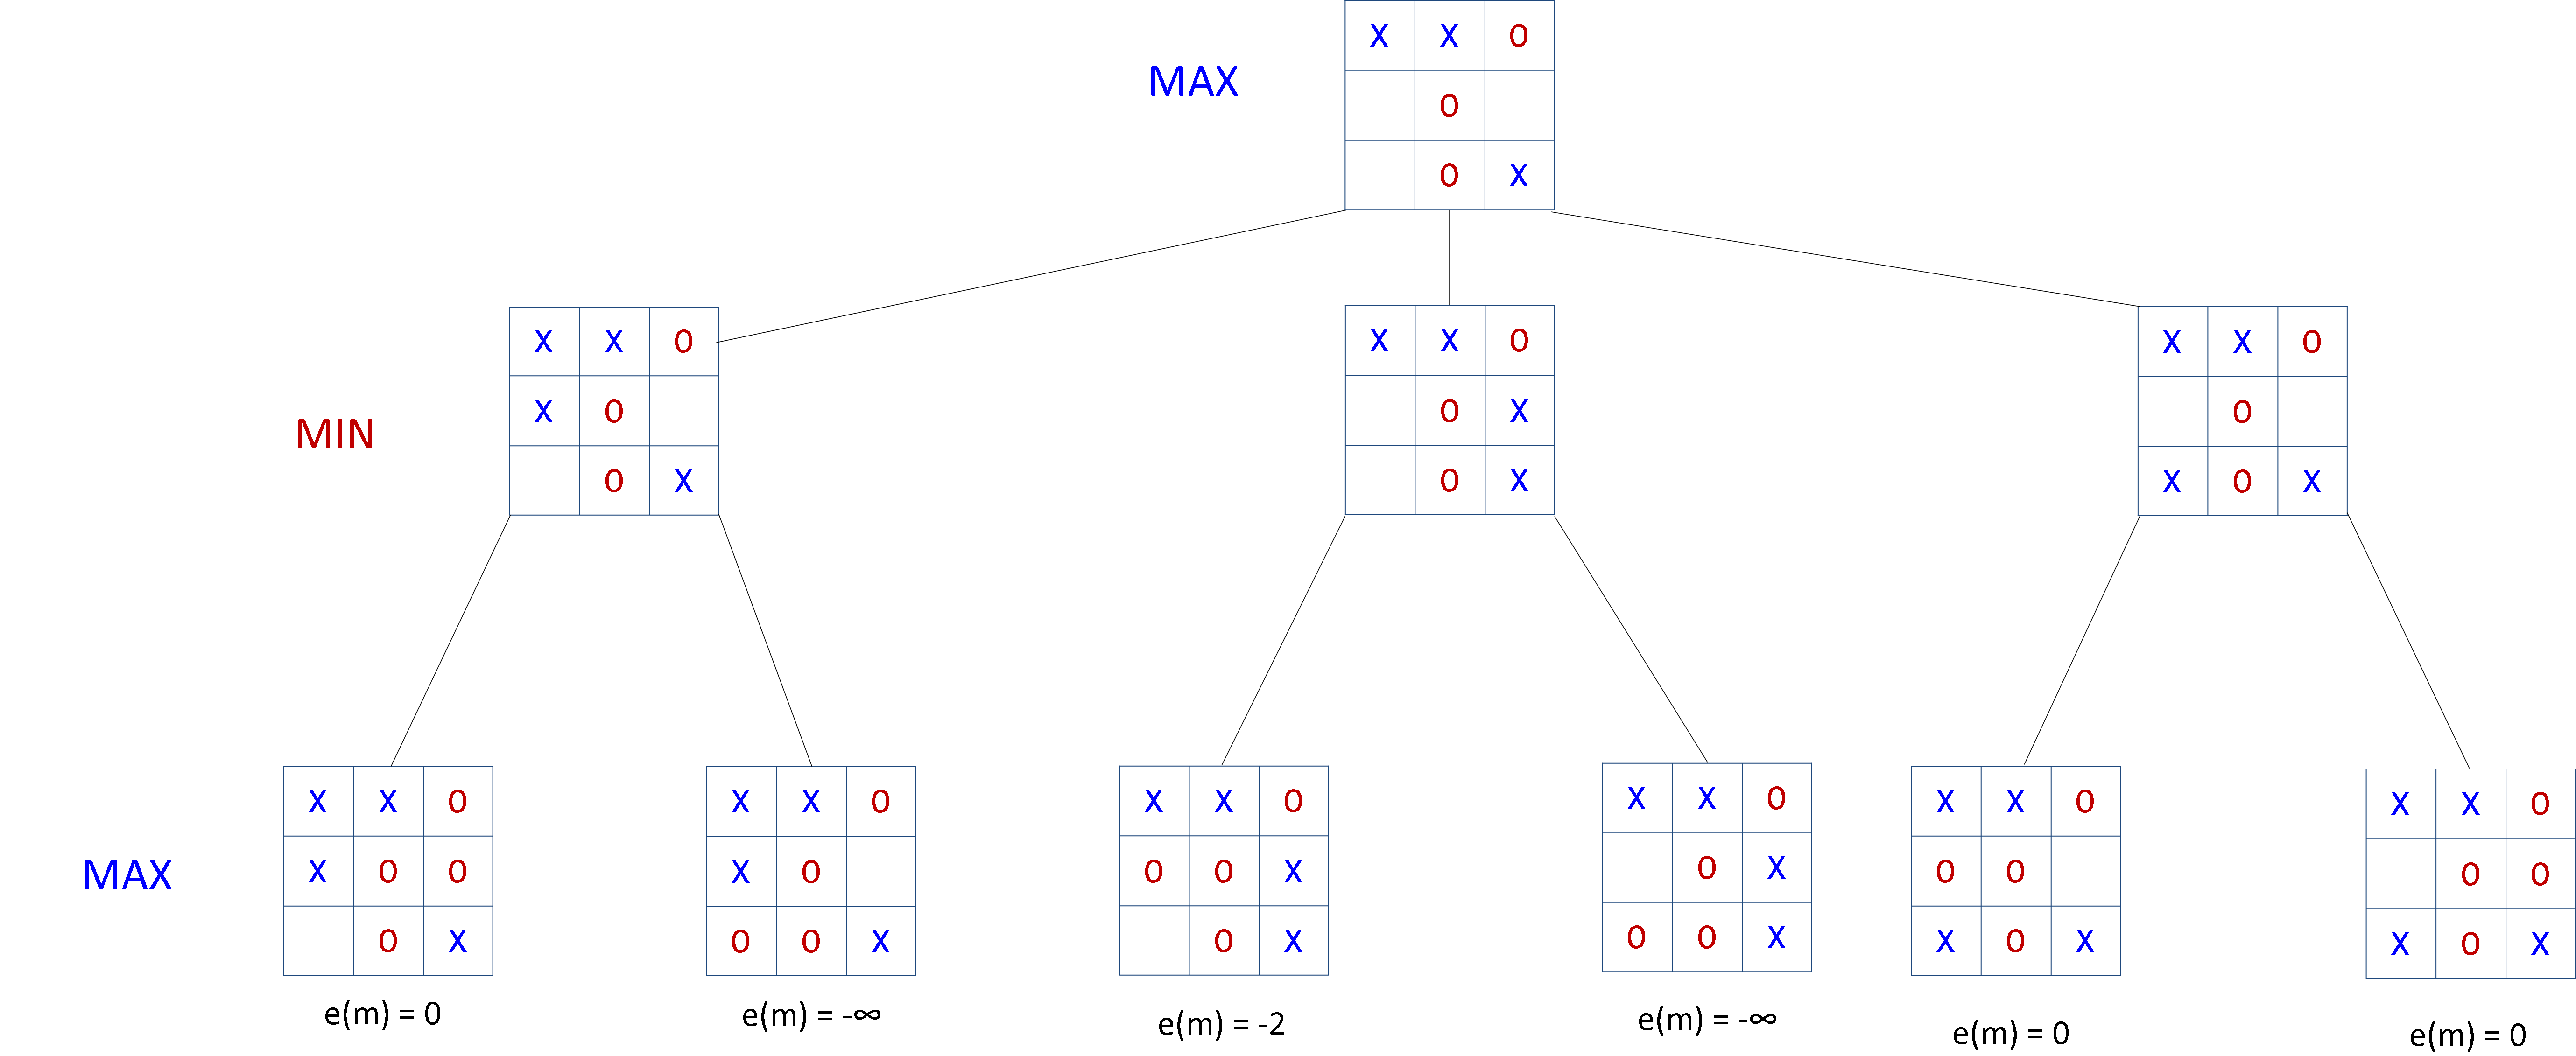 Minimax algorithm tic tac toe in c++ with source code 